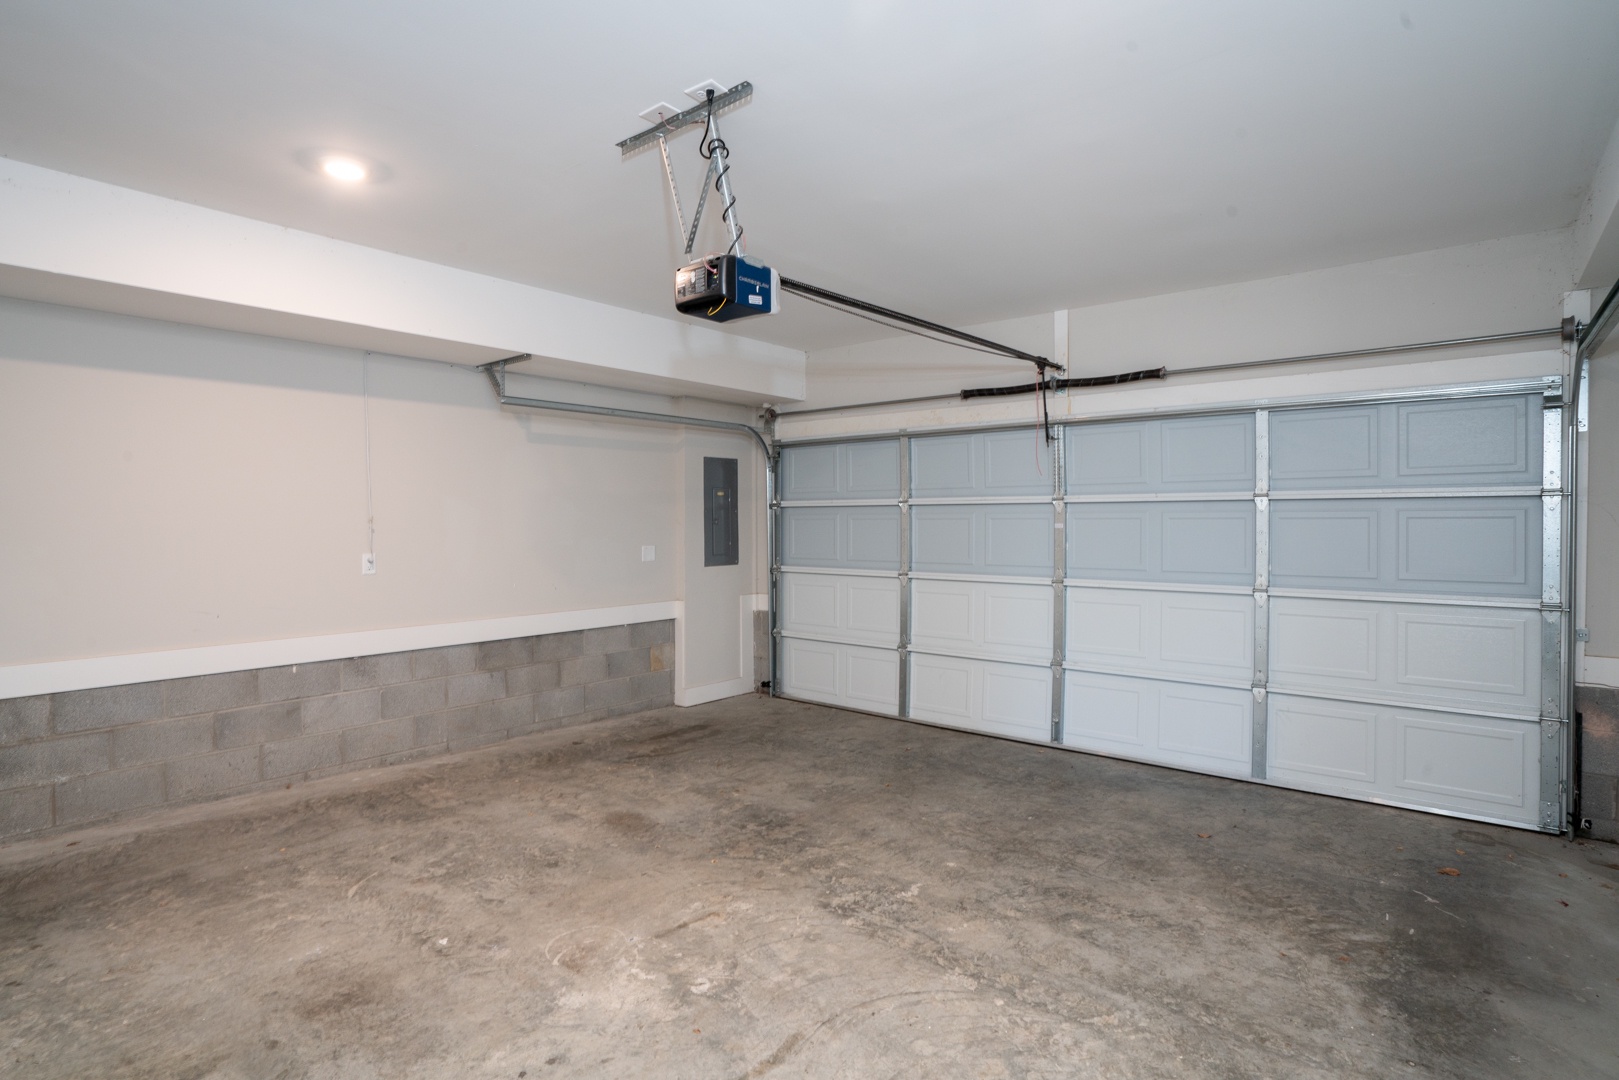 The garage offers parking space for up to 2 vehicles